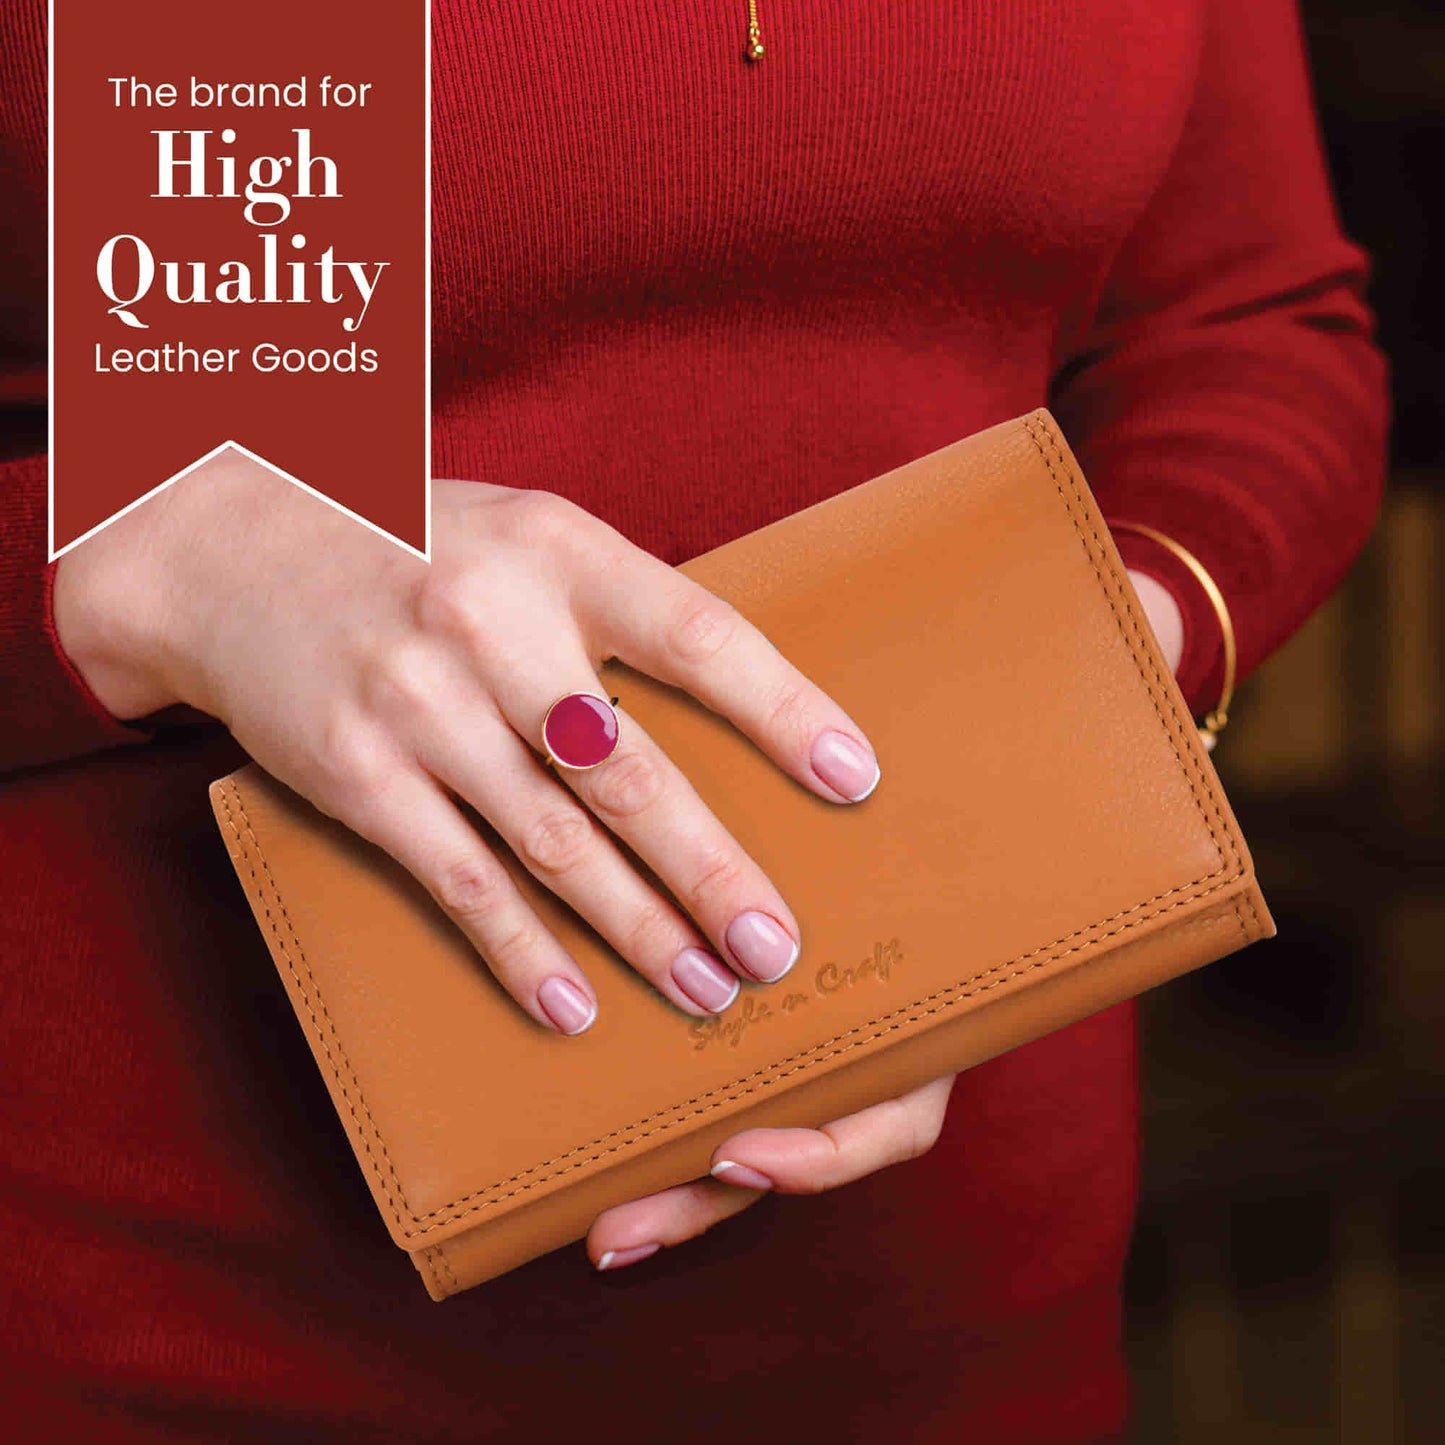 Style n Craft 300953-CG Ladies Clutch Wallet in Leather in Tan Color with RFID Protection - Wallet in Use - Lifestyle Image